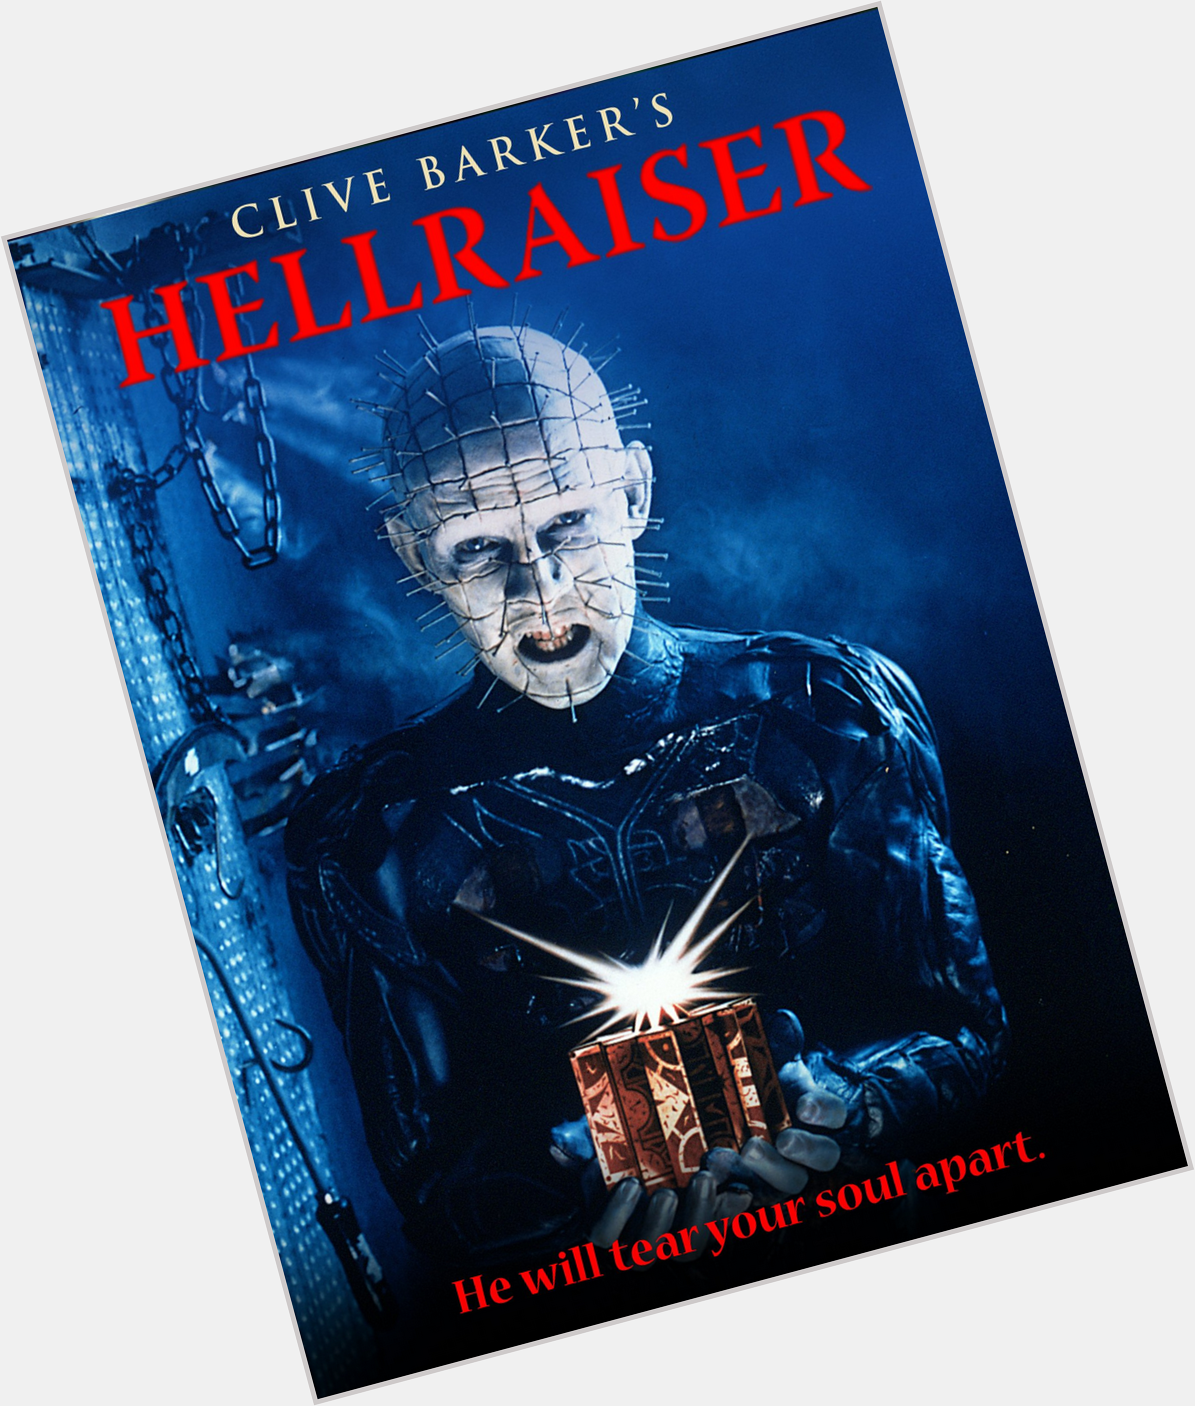 Happy birthday Doug Bradley, best known for his role as Pinhead in the Hellraiser film series  